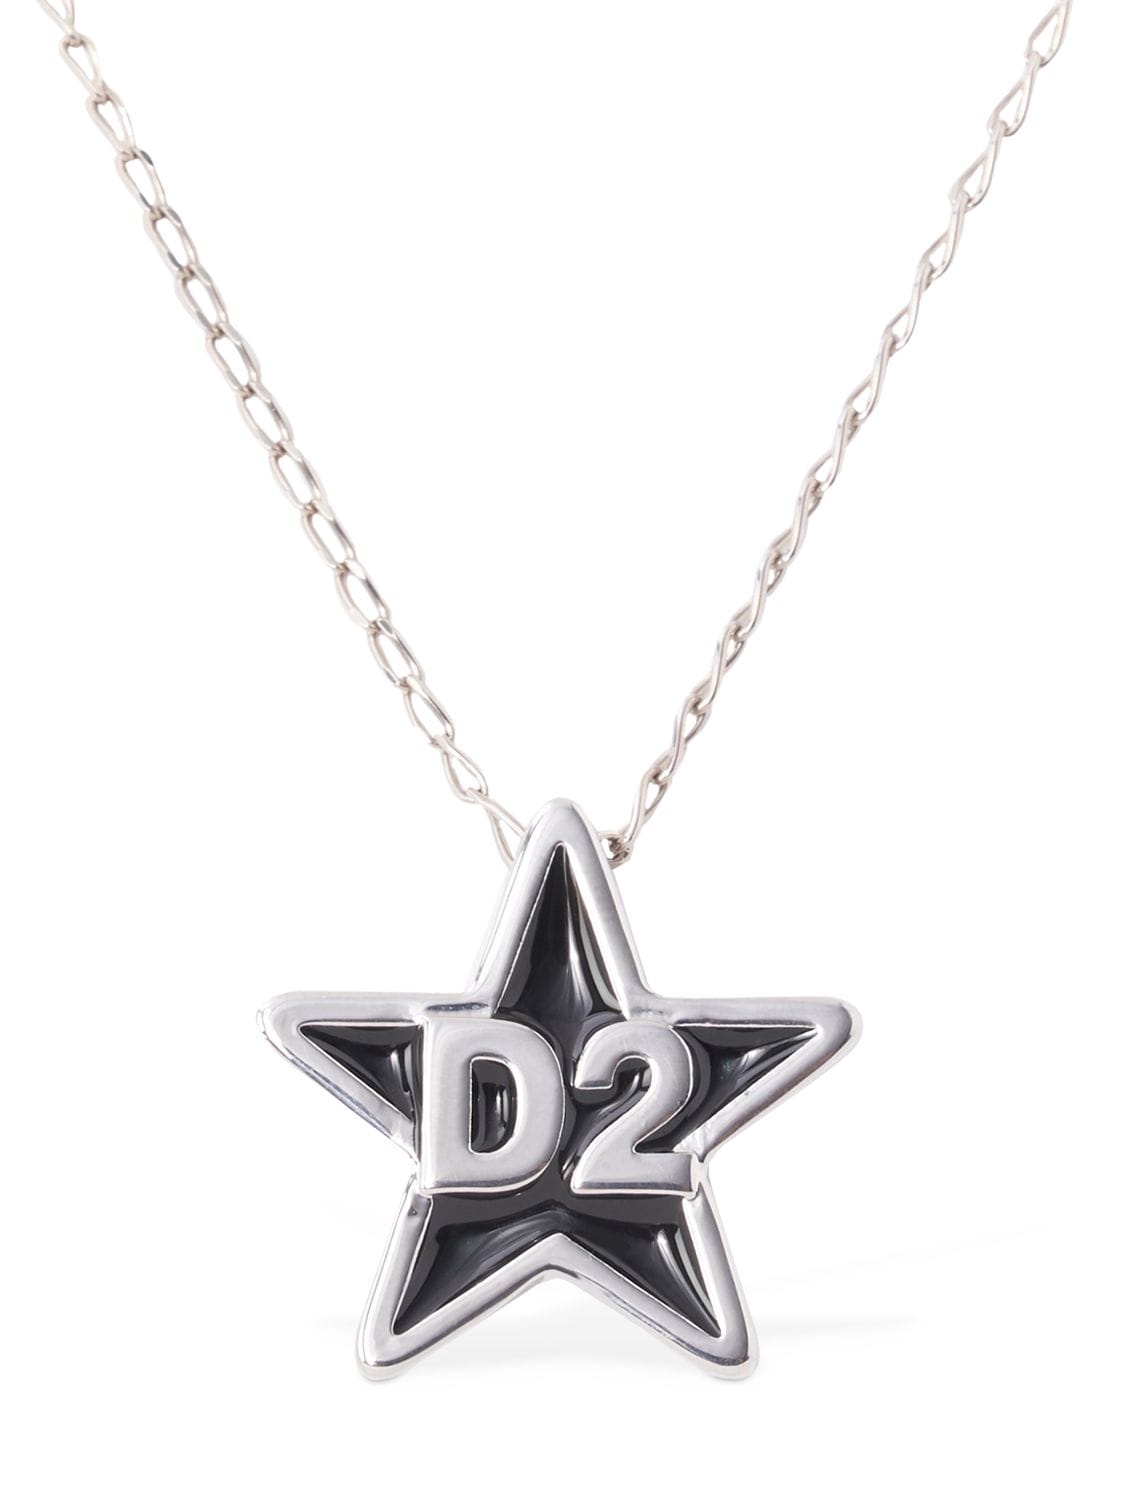 Image of D2 Long Necklace